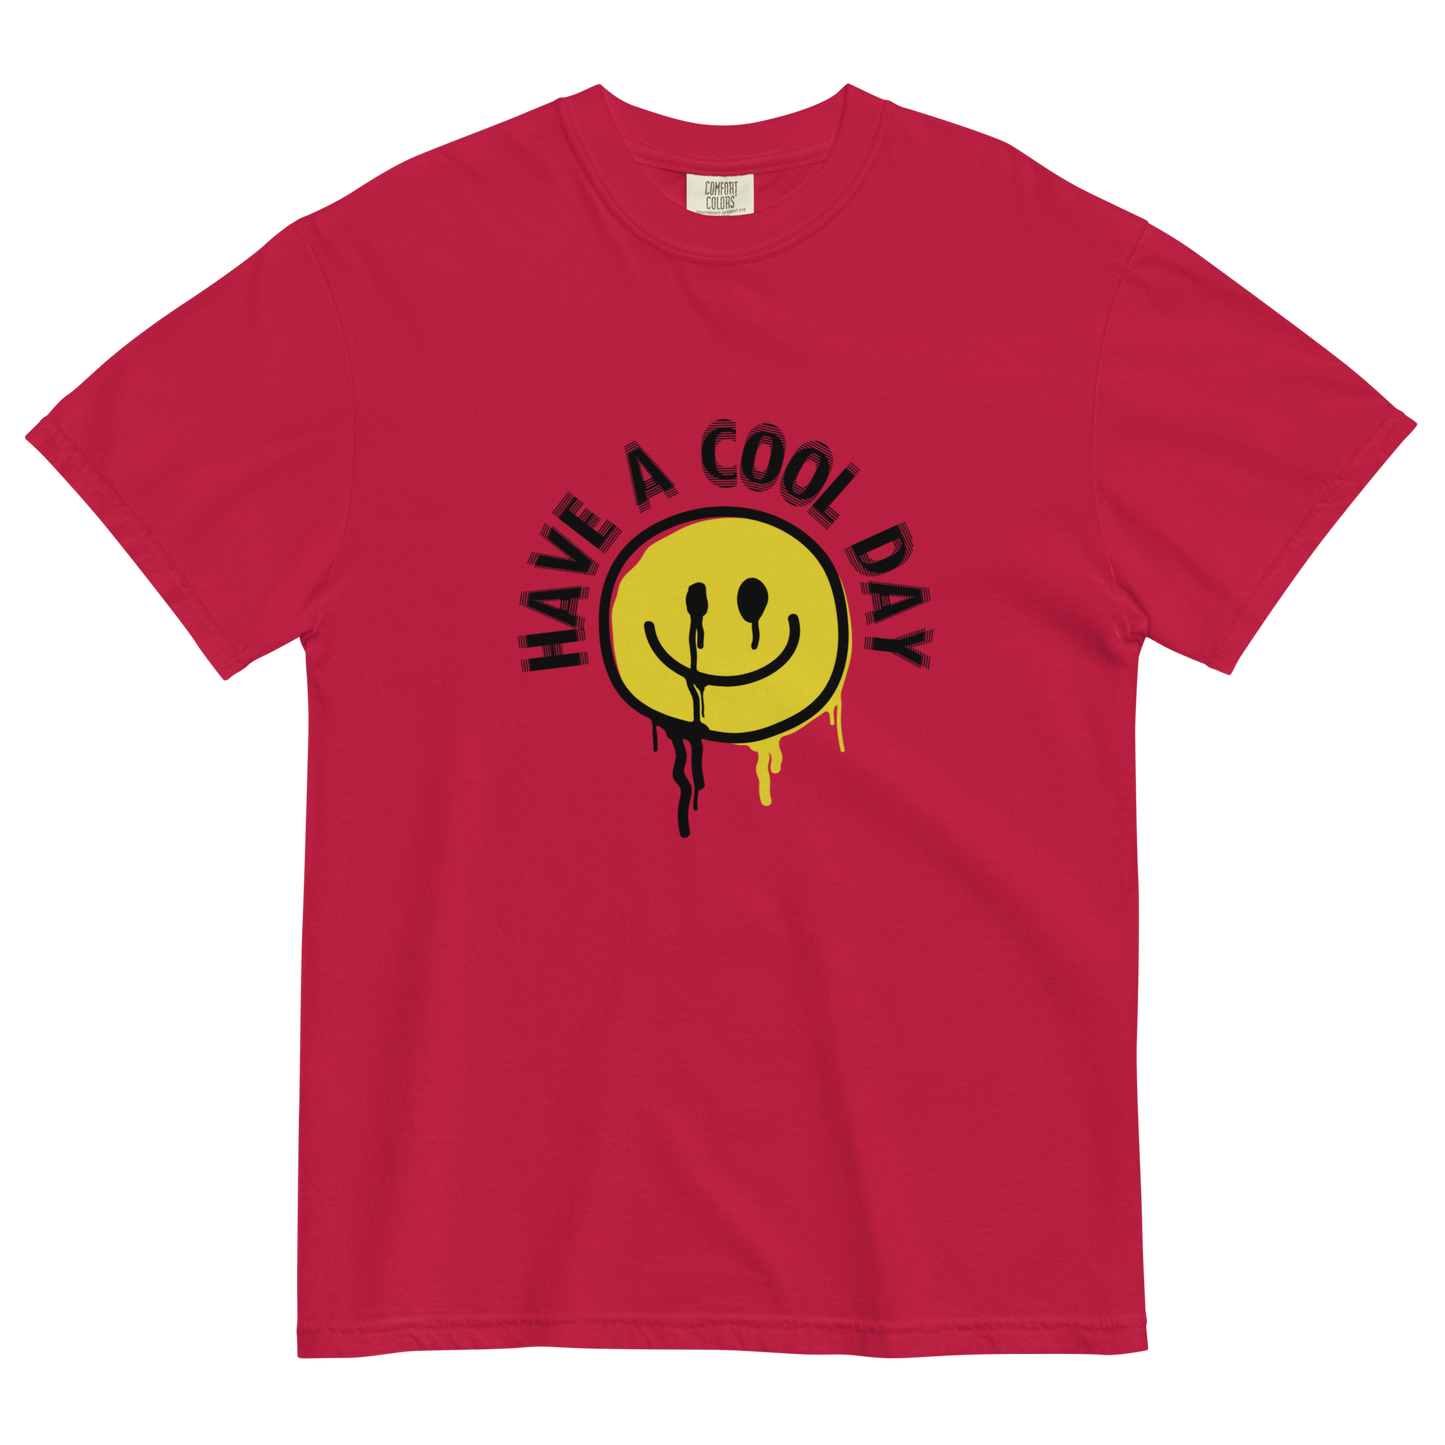 Have A Cool Day heavyweight t-shirt